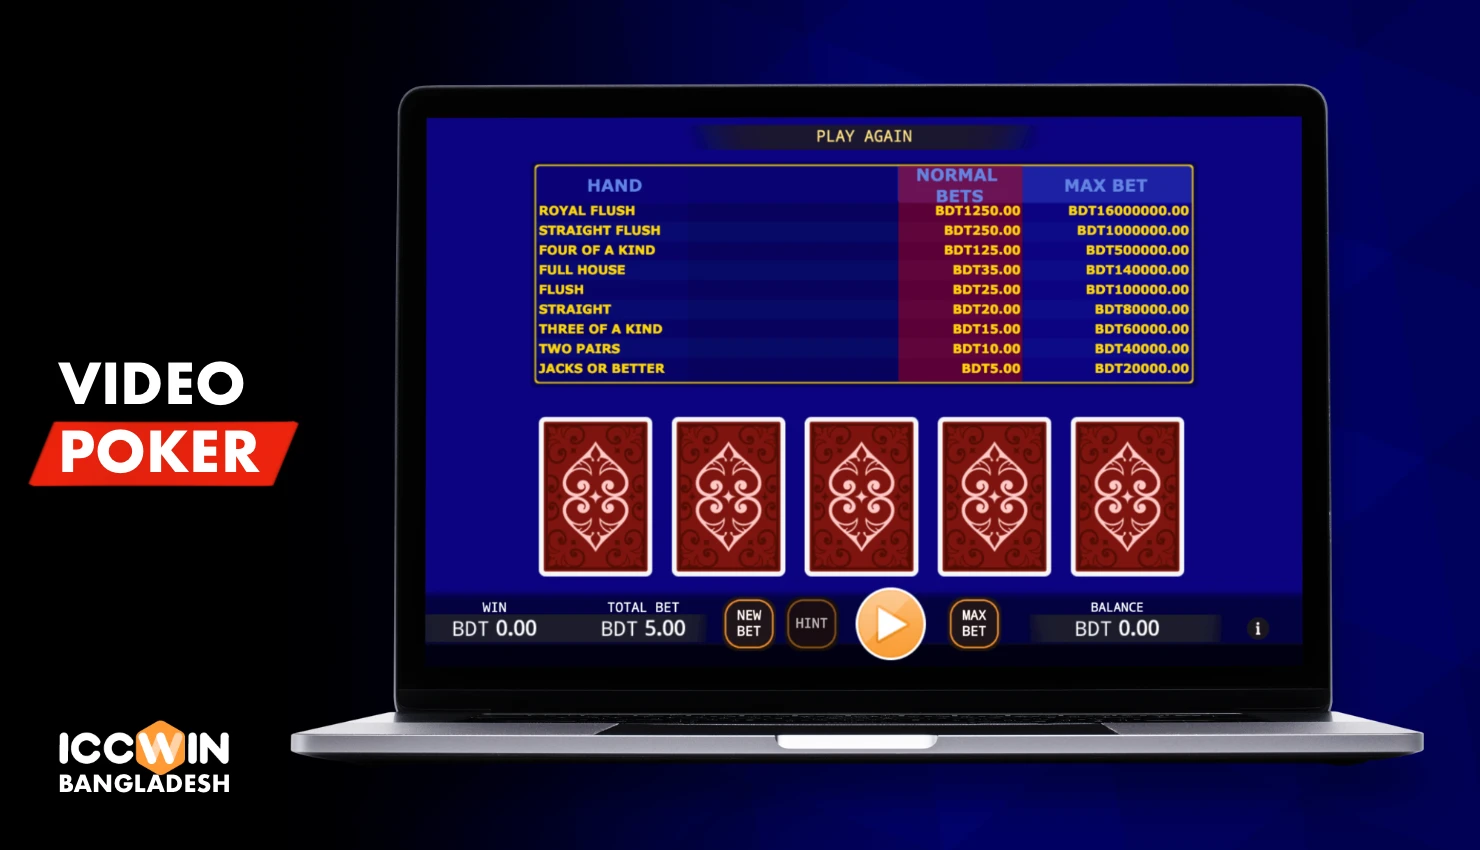 Video poker at Iccwin platform gives you the opportunity to compete with other players from around the world